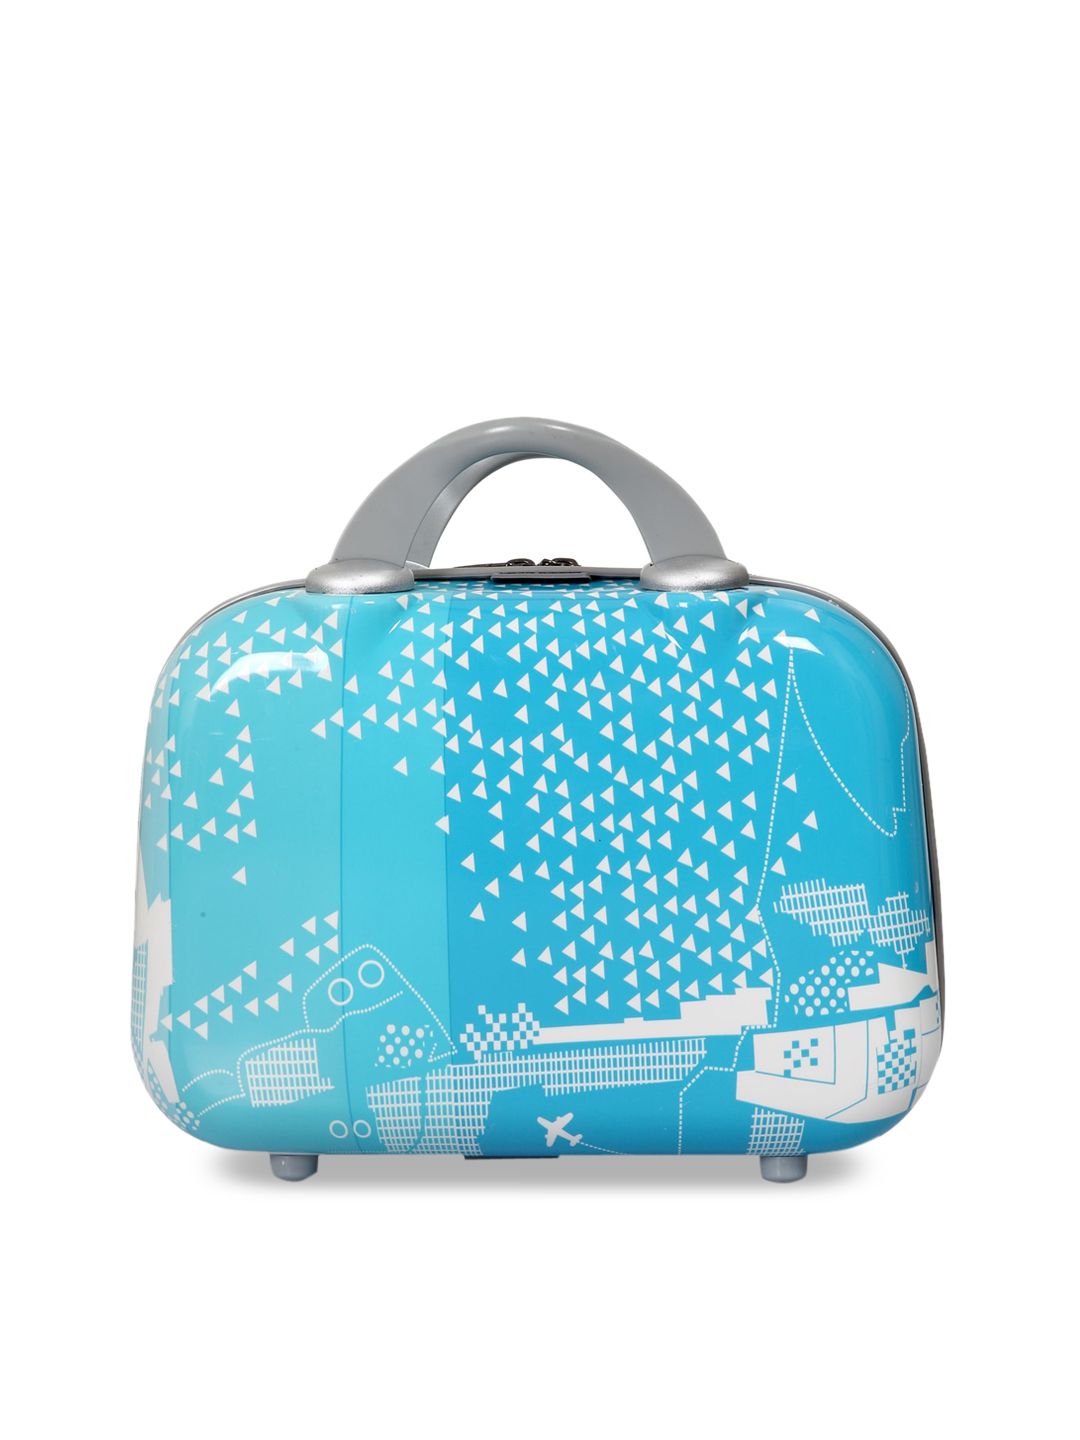 Polo Class Blue  & White Printed Vanity Bag Price in India